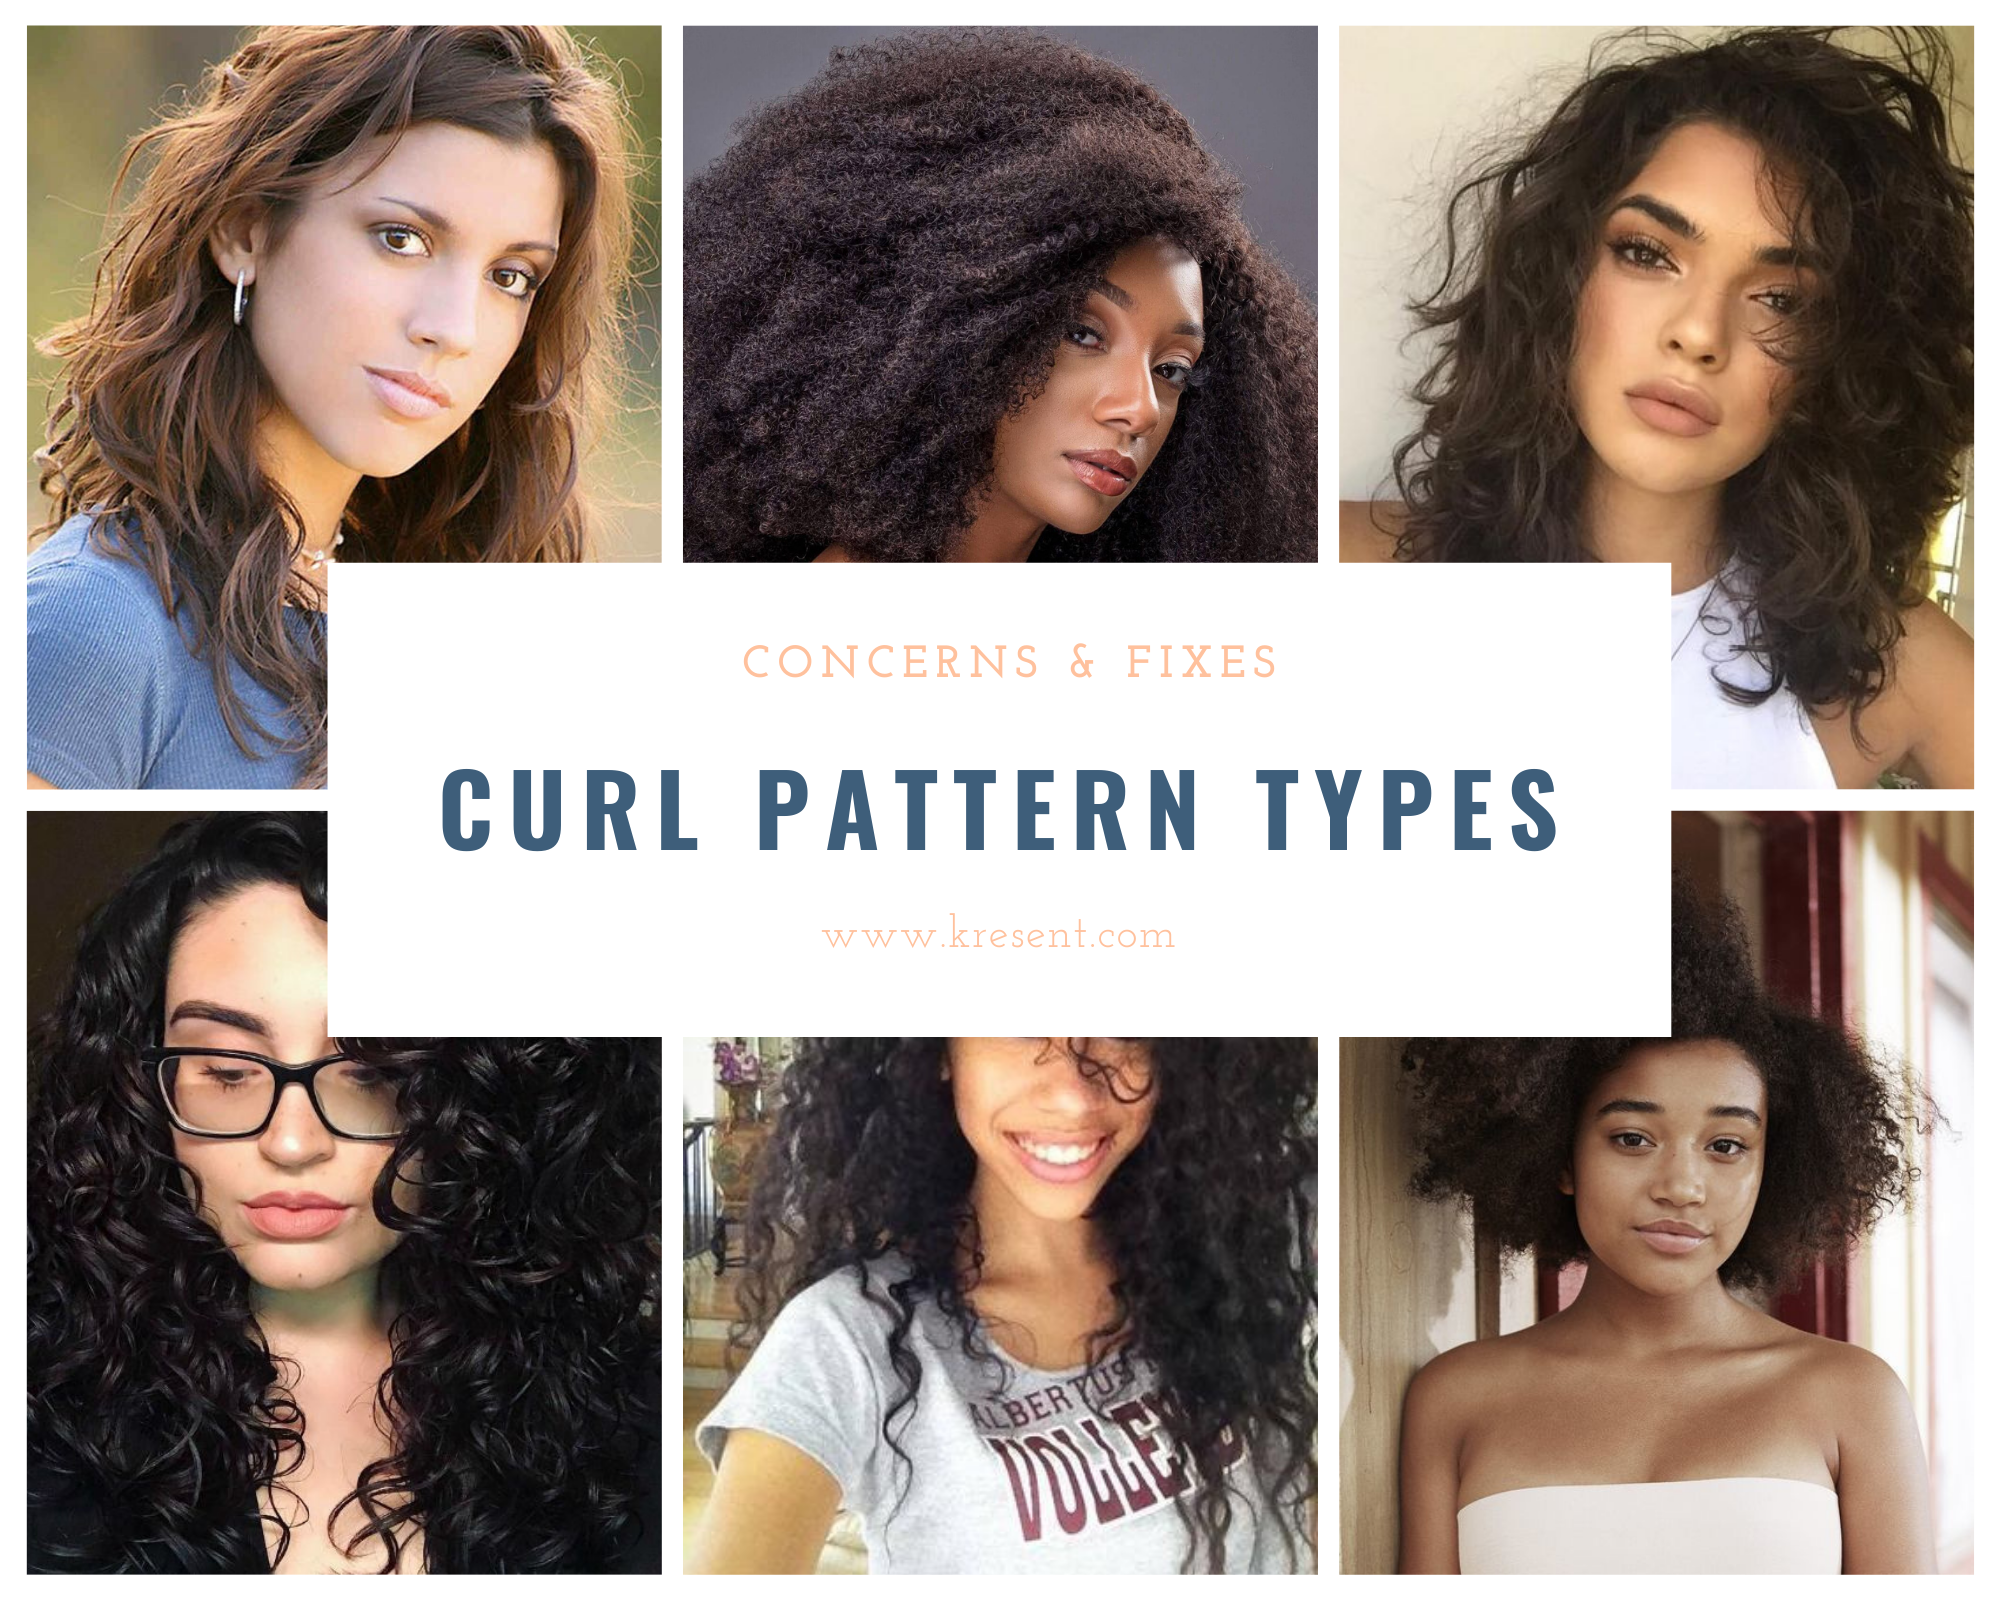 Curl Pattern Types Identify Your Curl Hair Pattern With Curl Pattern Chart 